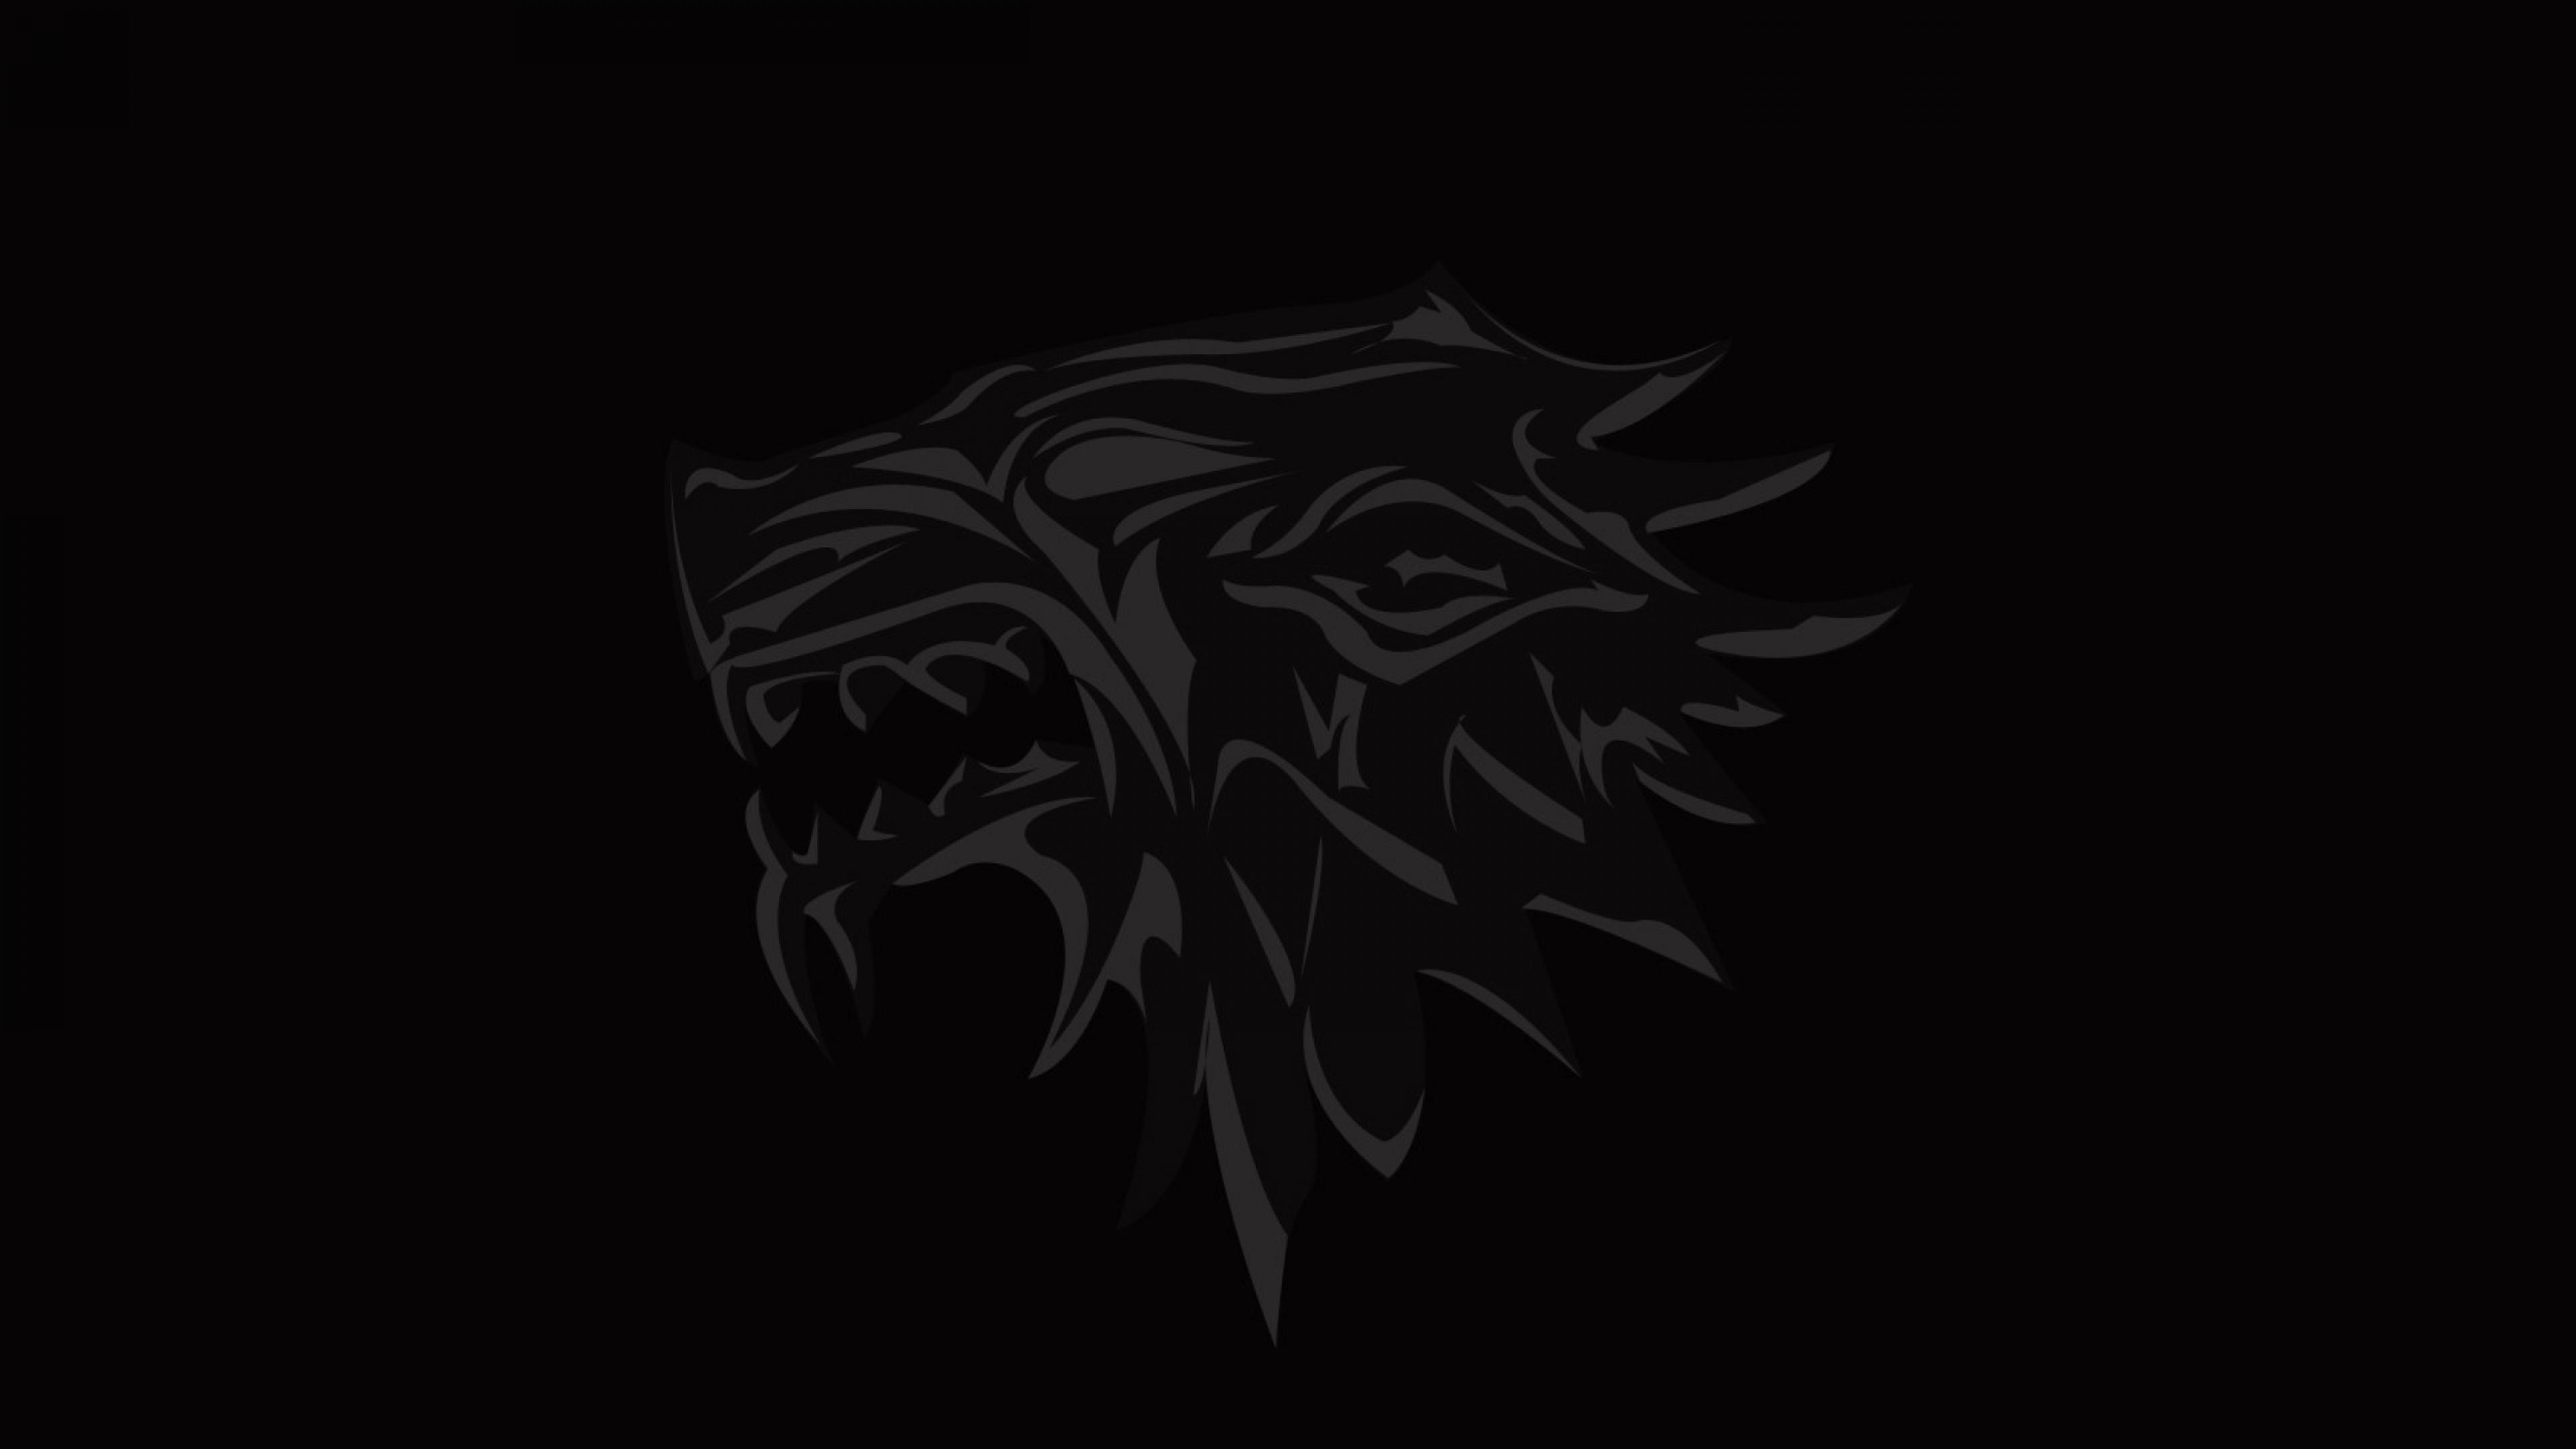 Game Of Thrones Logo Wallpapers - Wallpaper Cave